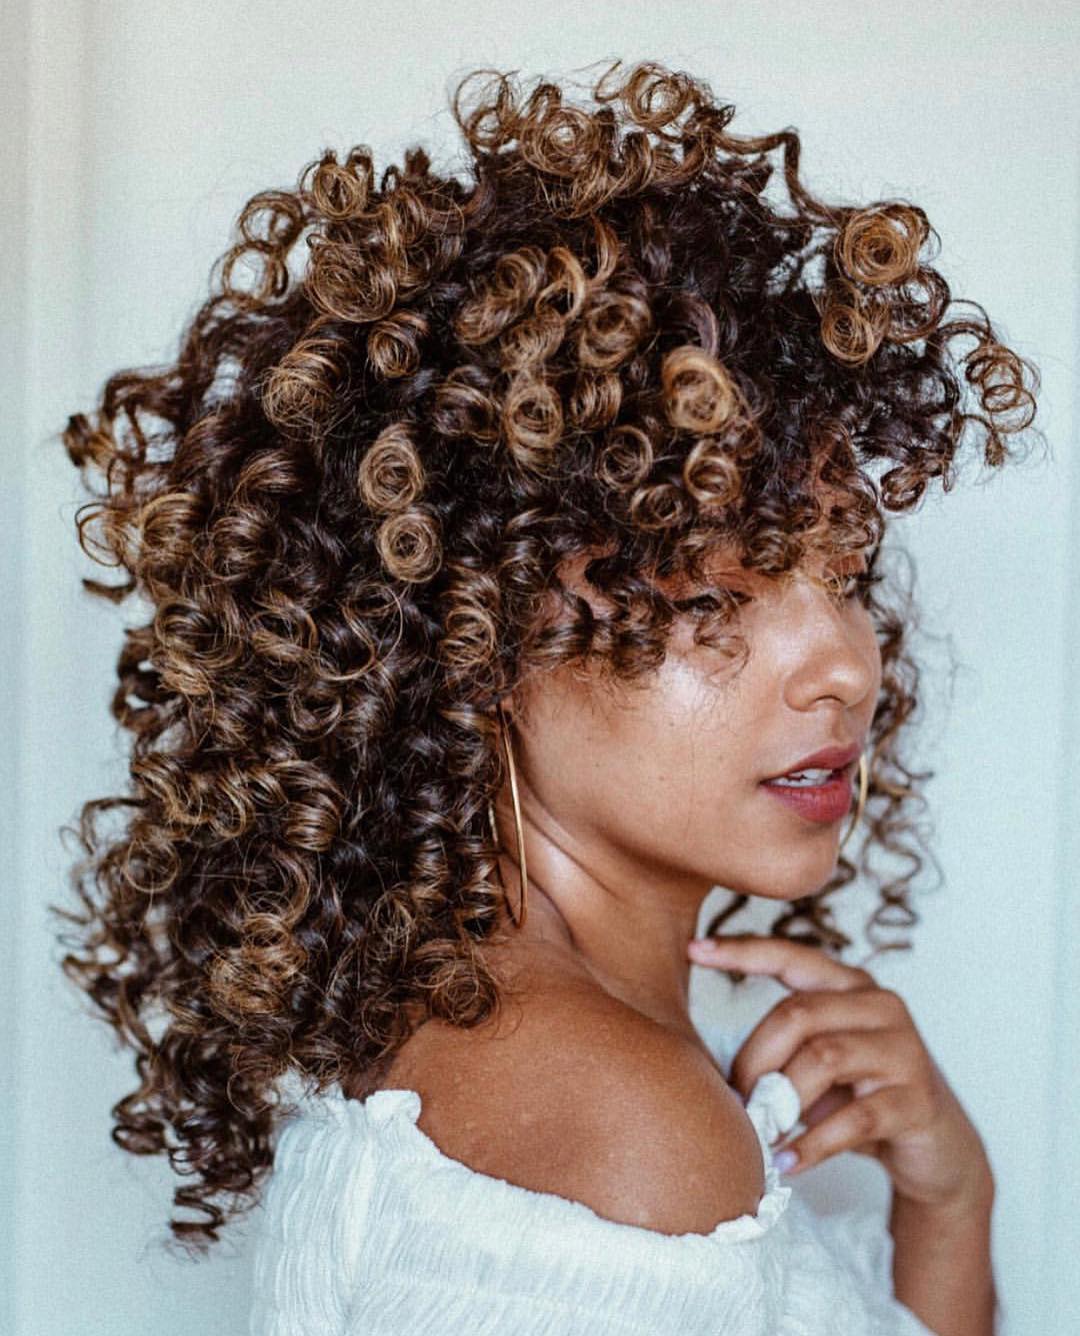 35 cool perm hair ideas everyone will be obsessed with in 2019